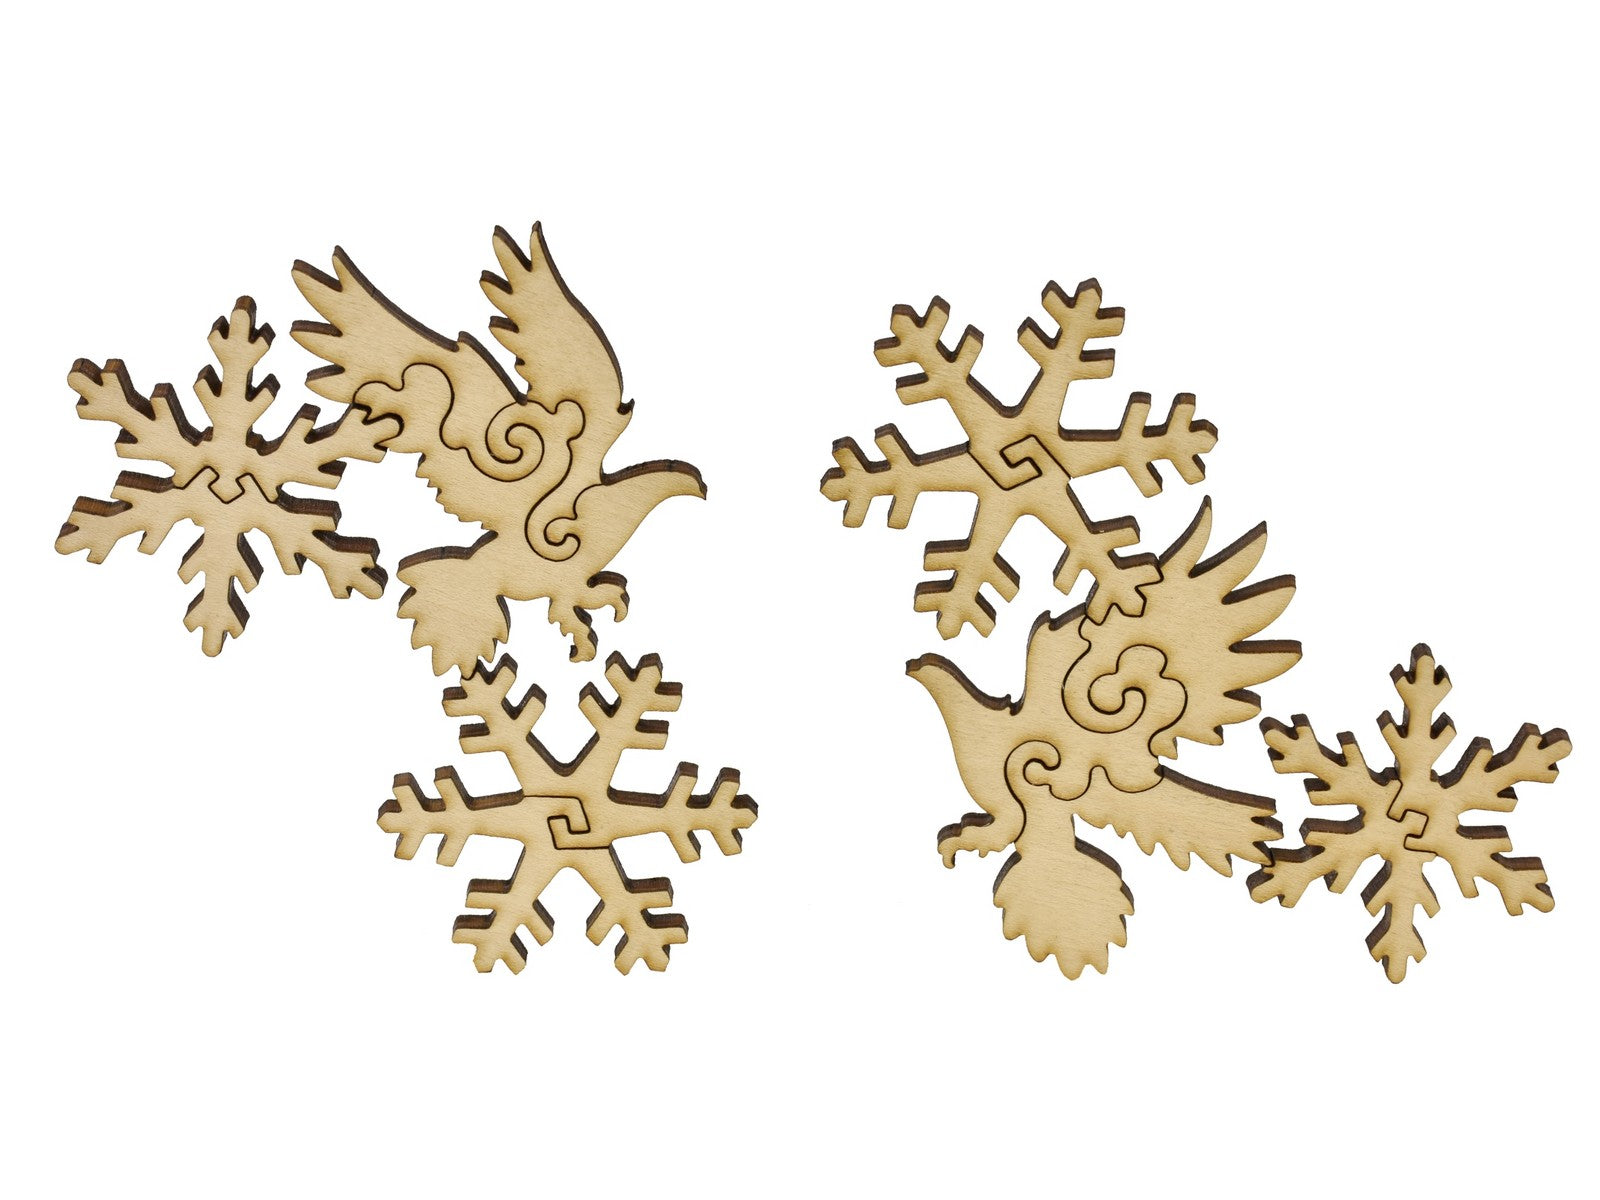 A closeup of pieces in the shape of birds and snowflakes.